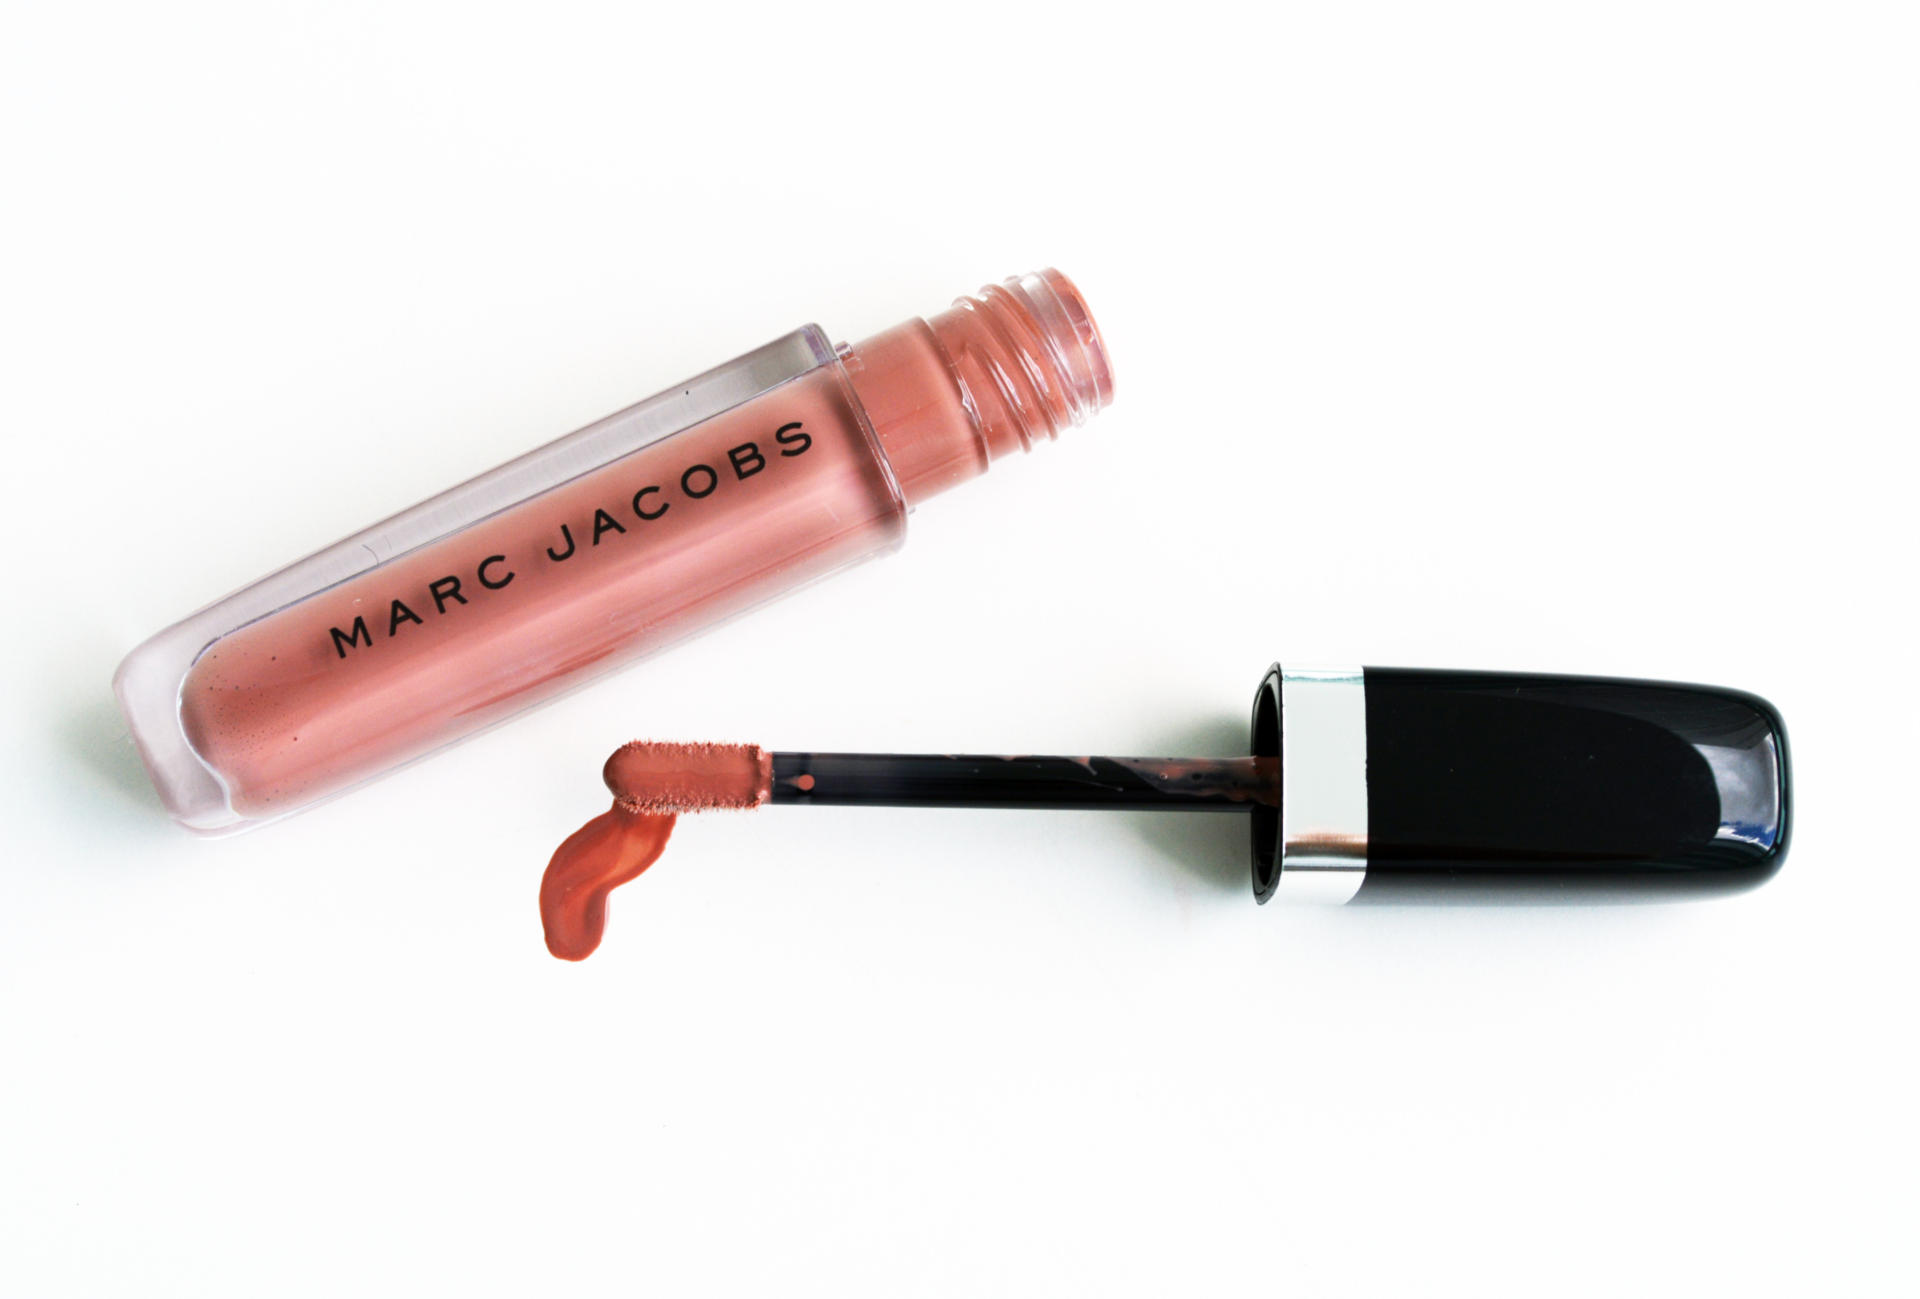 Marc Jacobs Enamored Hi-Shine Lip Lacquer Lipgloss in 344 Skin Deep